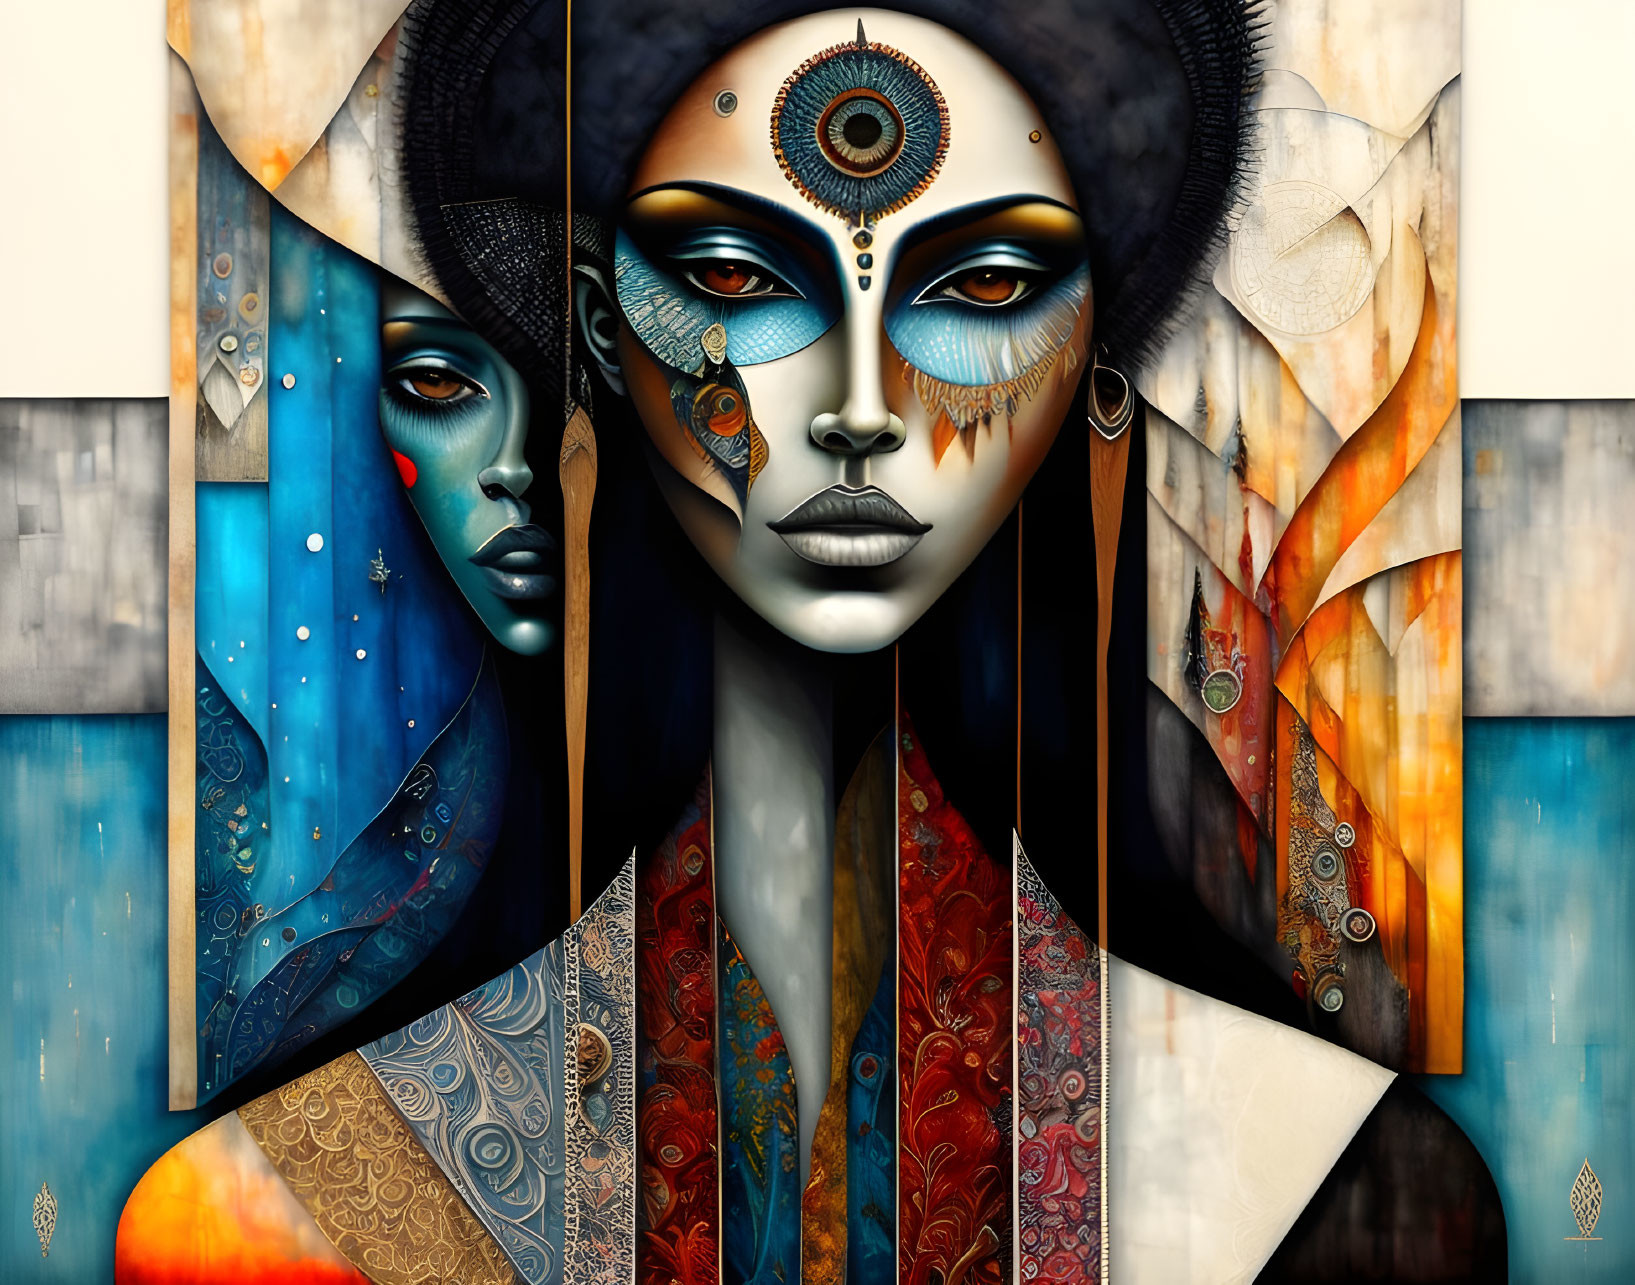 Colorful digital artwork: Two stylized women with intricate facial adornments in geometric and organic motifs.